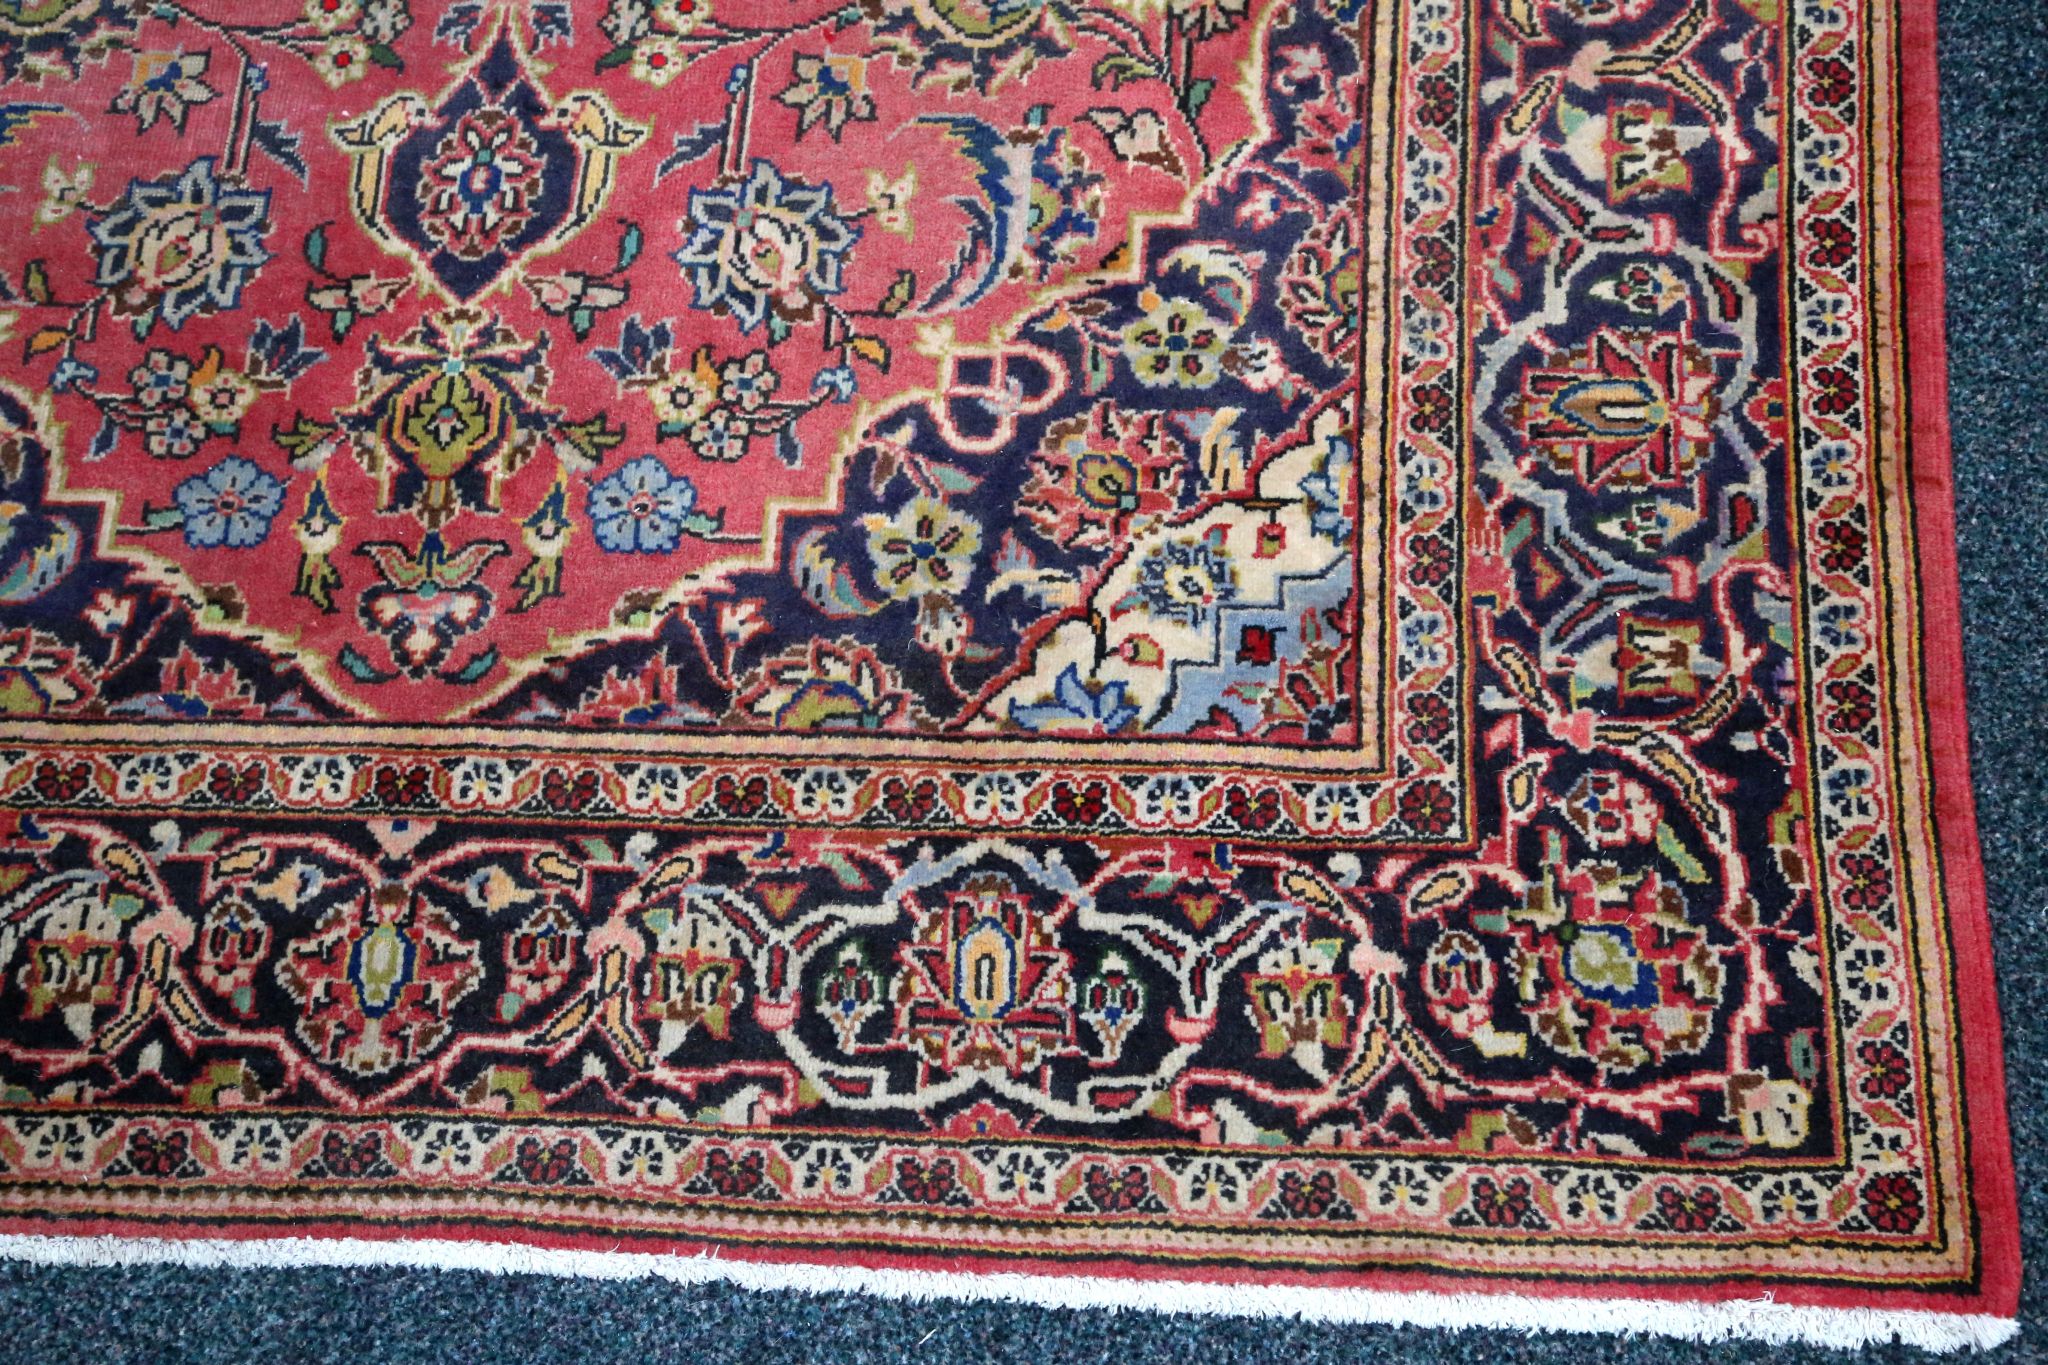 An antique Persian kashan with central blue medallion on cherry field